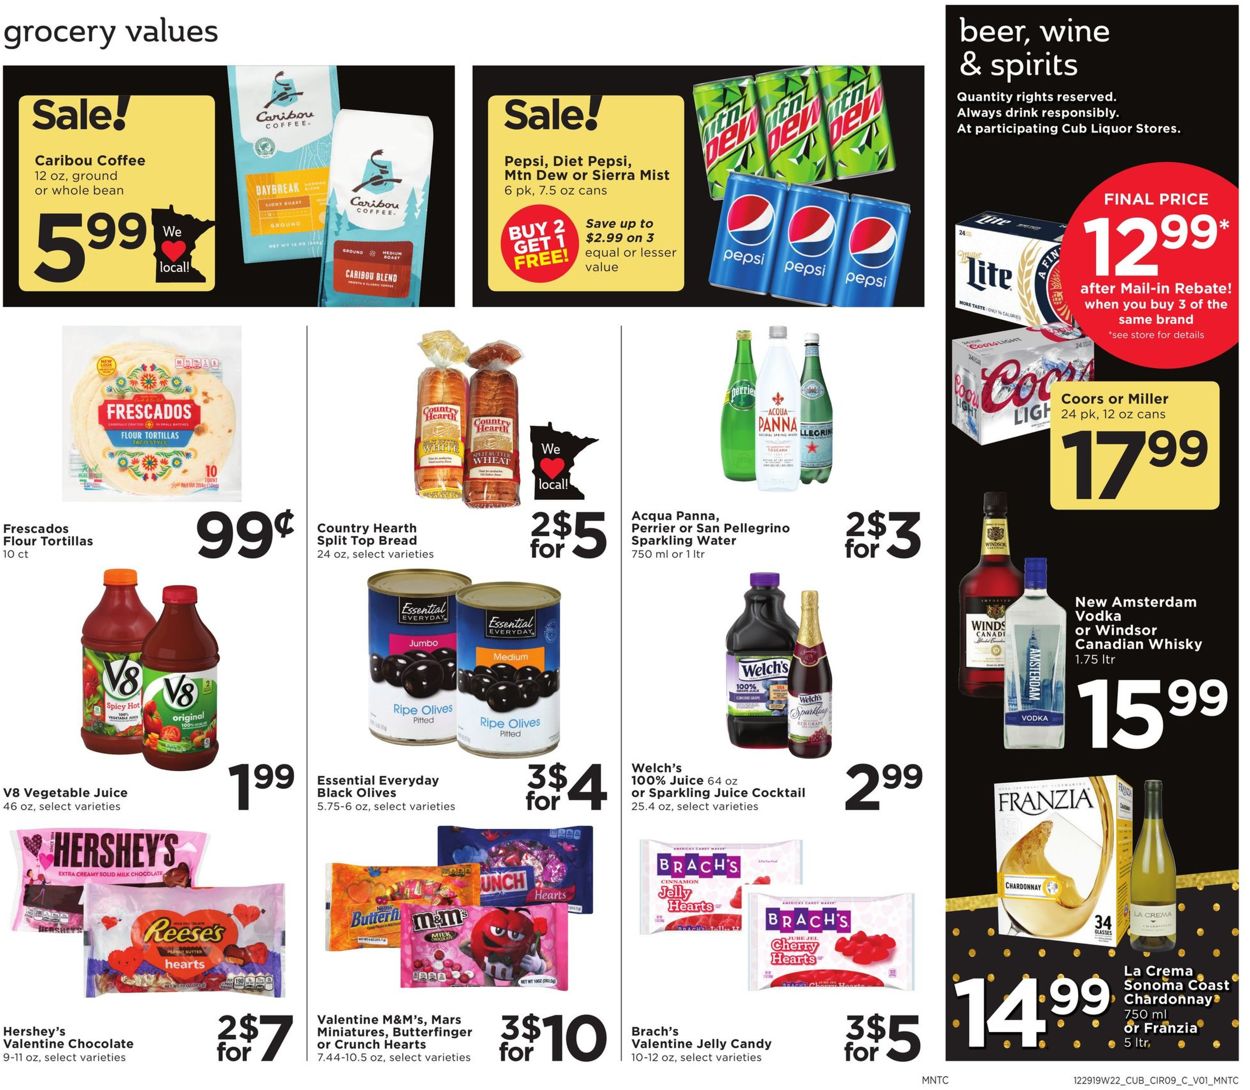 Catalogue Cub Foods - New Year's Ad 2019/2020 from 12/29/2019